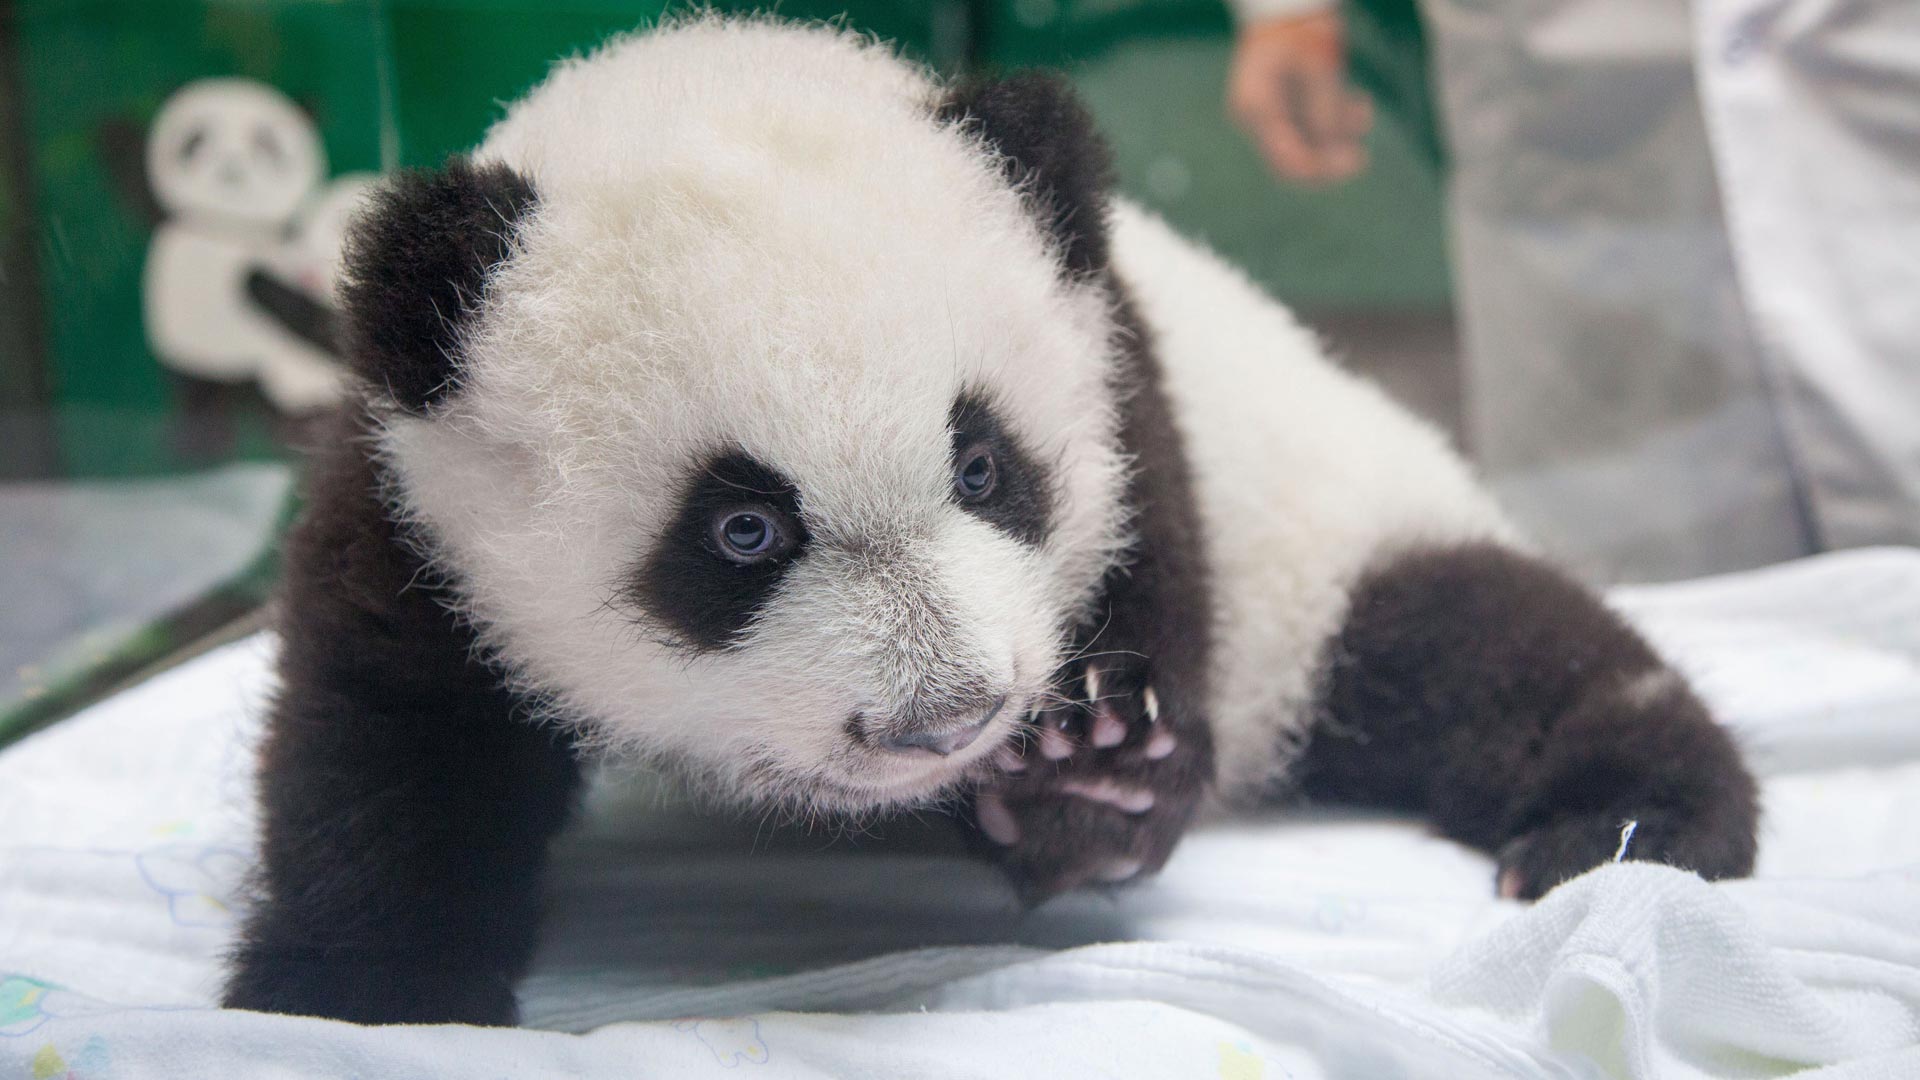 China zoo unveils first panda triplets - Mirror Online